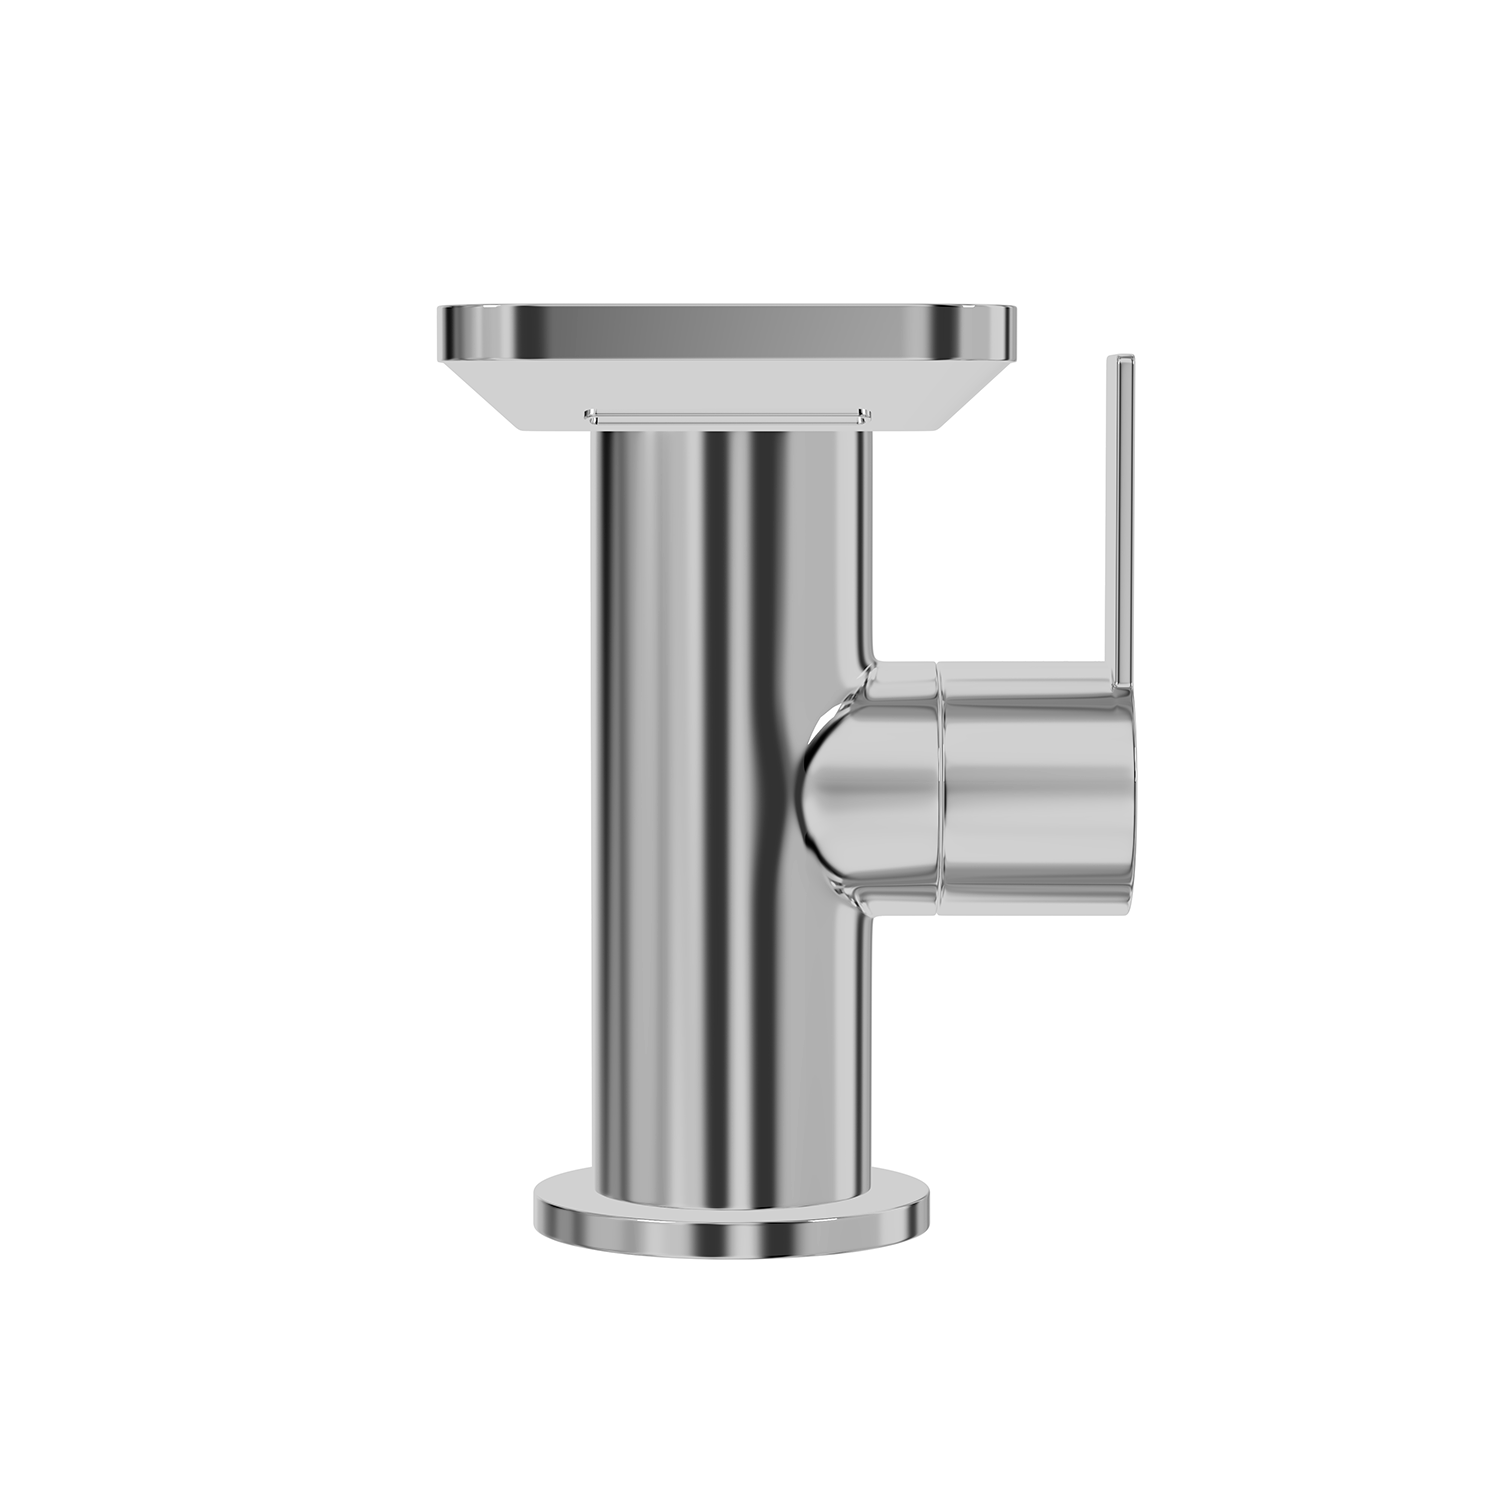 DAX Single Handle Bathroom Waterfall Faucet, Deck Mount, Brass Body, Spout Height 4-15/16 Inches (DAX-8205)